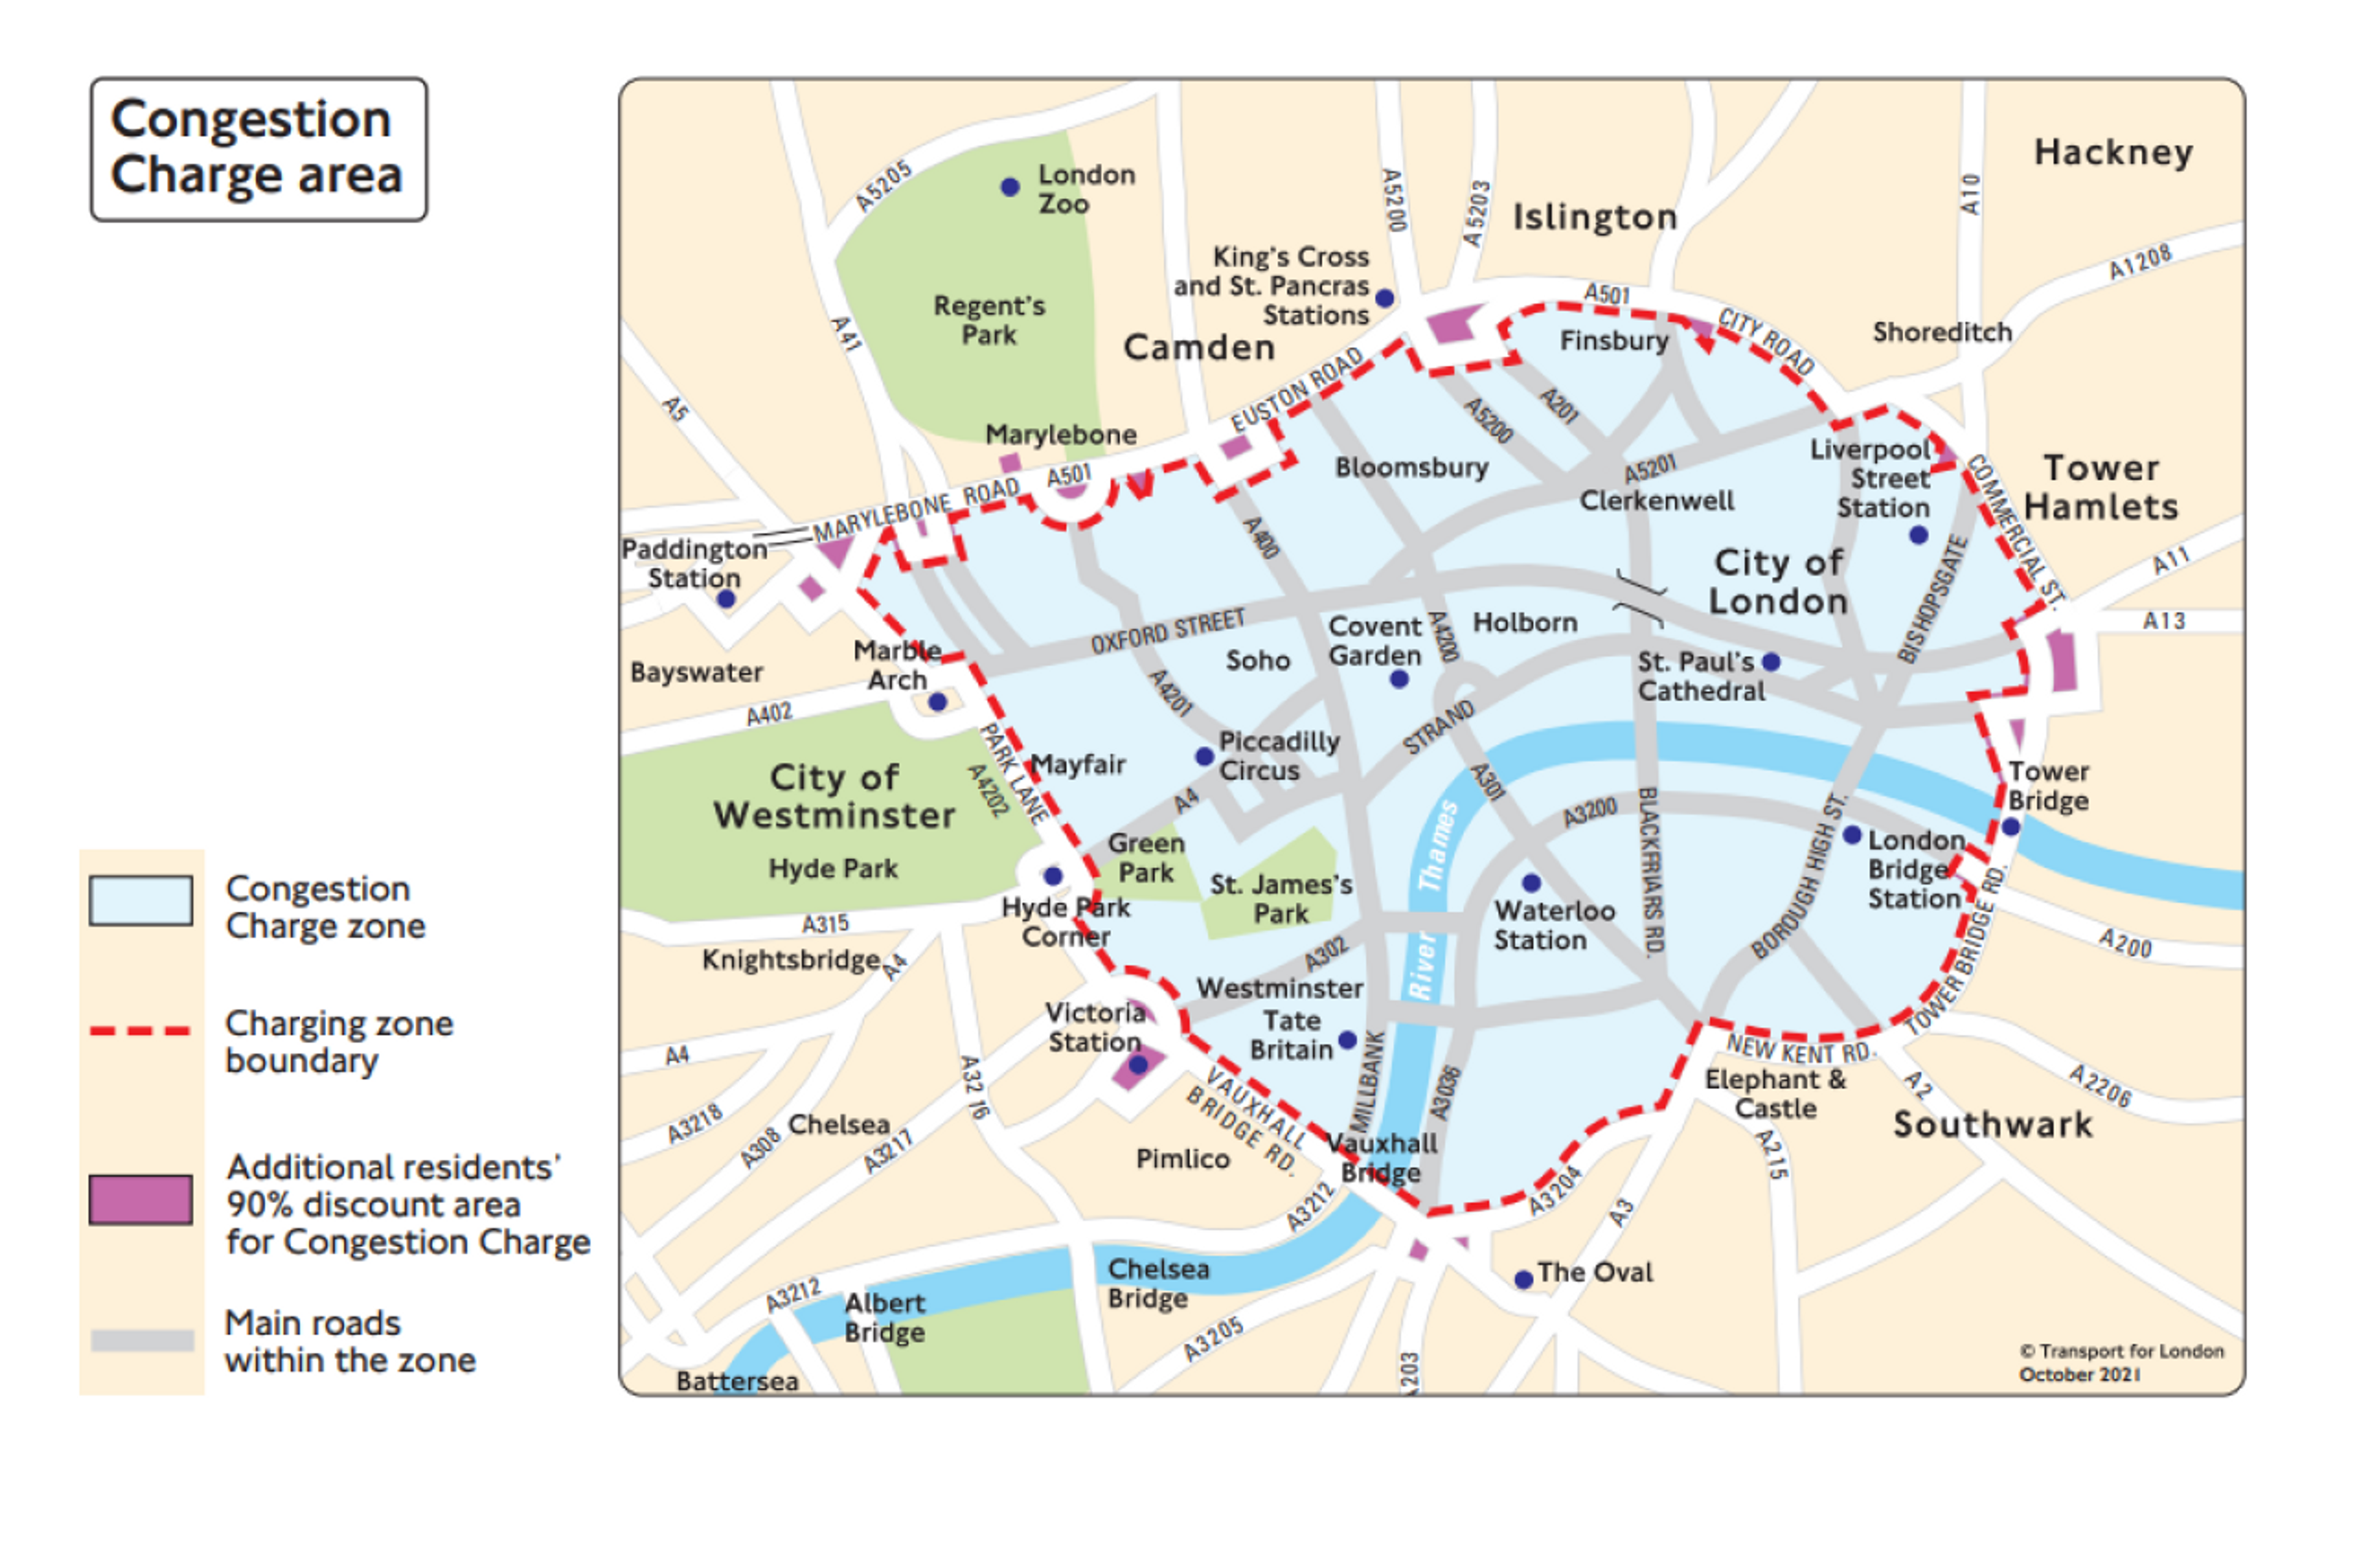 Congestion charge area in London